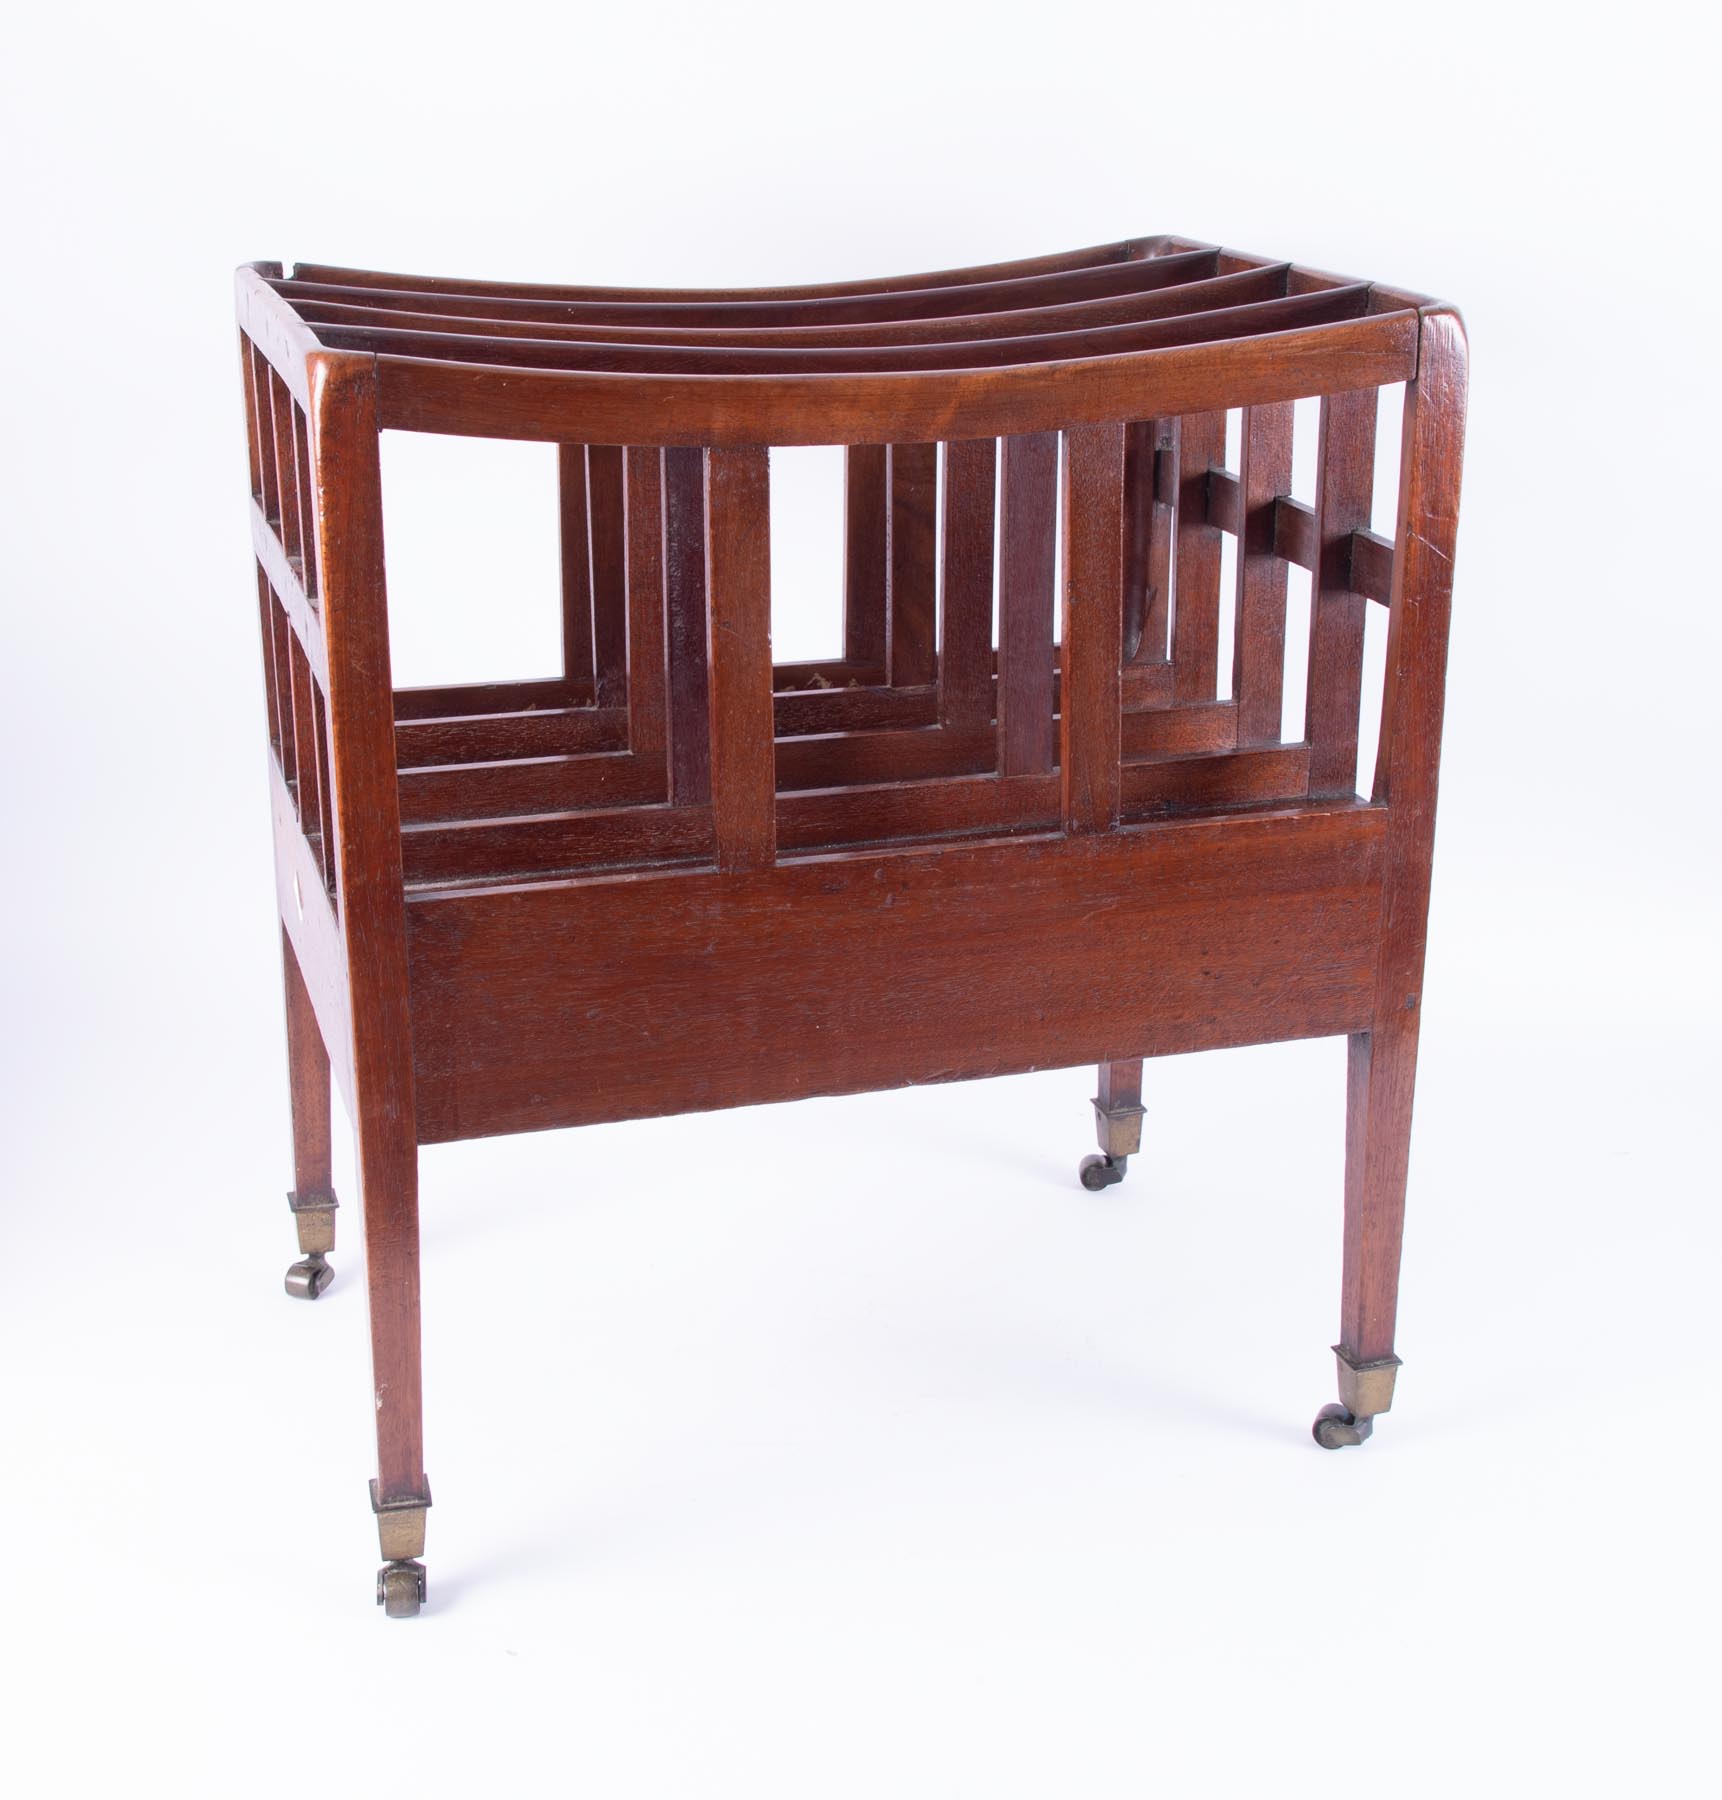 A 19th Century mahogany canterbury with brass castors, height 51cm.